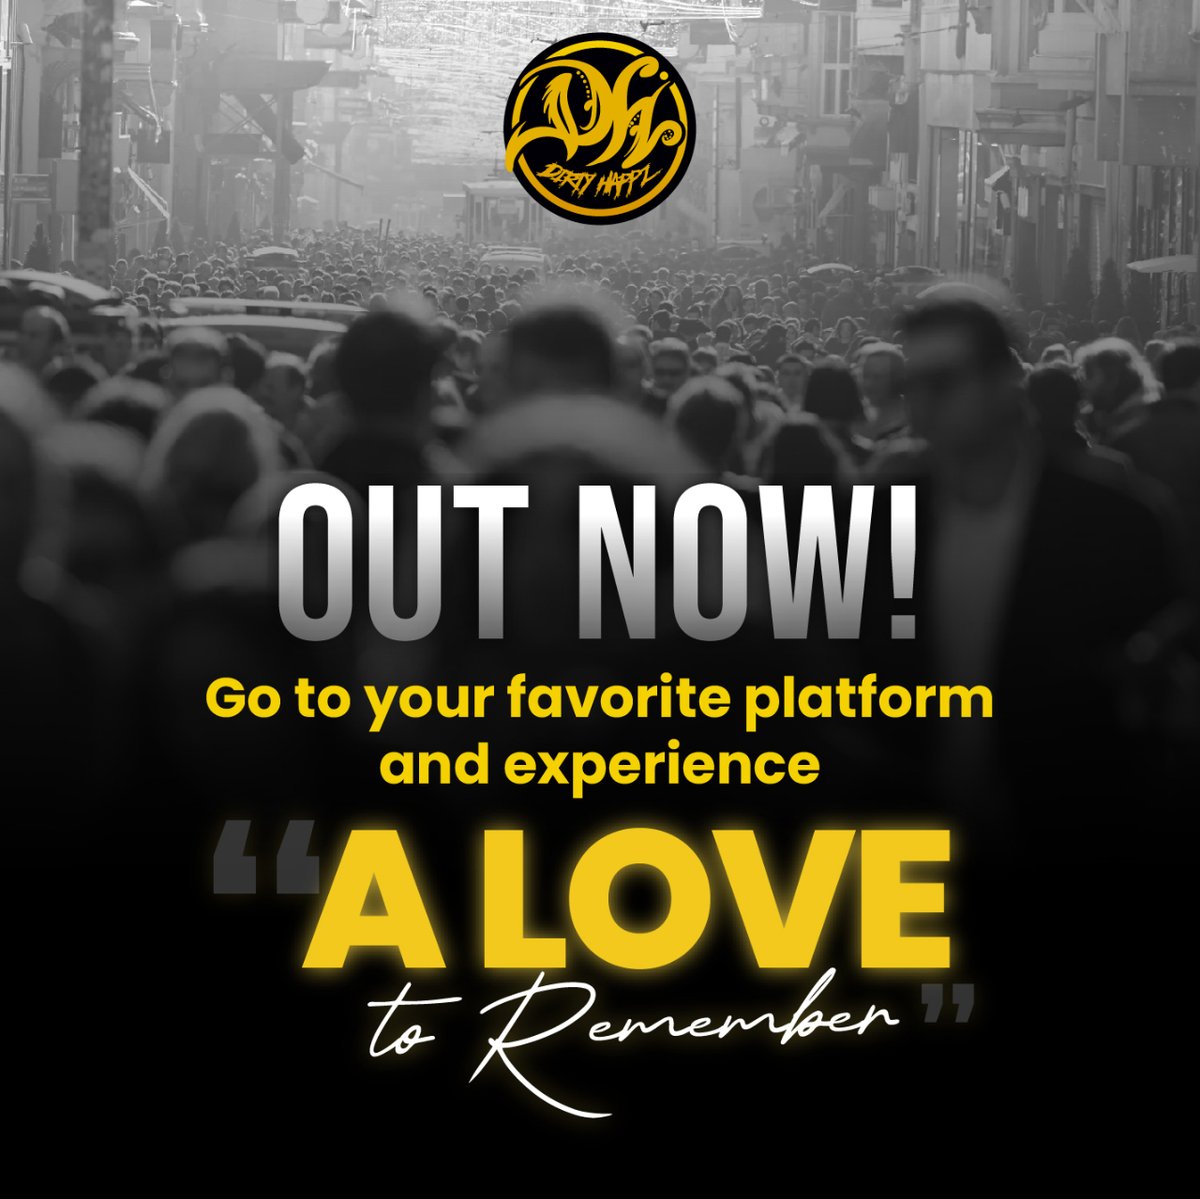 💔IT'S HERE!💔 The moment you've all been waiting for has arrived, 'A Love to Remember', the sensational new track by #DirtyHappz has officially dropped!! Head over to your favorite streaming platform NOW 🎧 #ALovetoRemember #NewMusic #OutNow #HipHop #LosAngeles